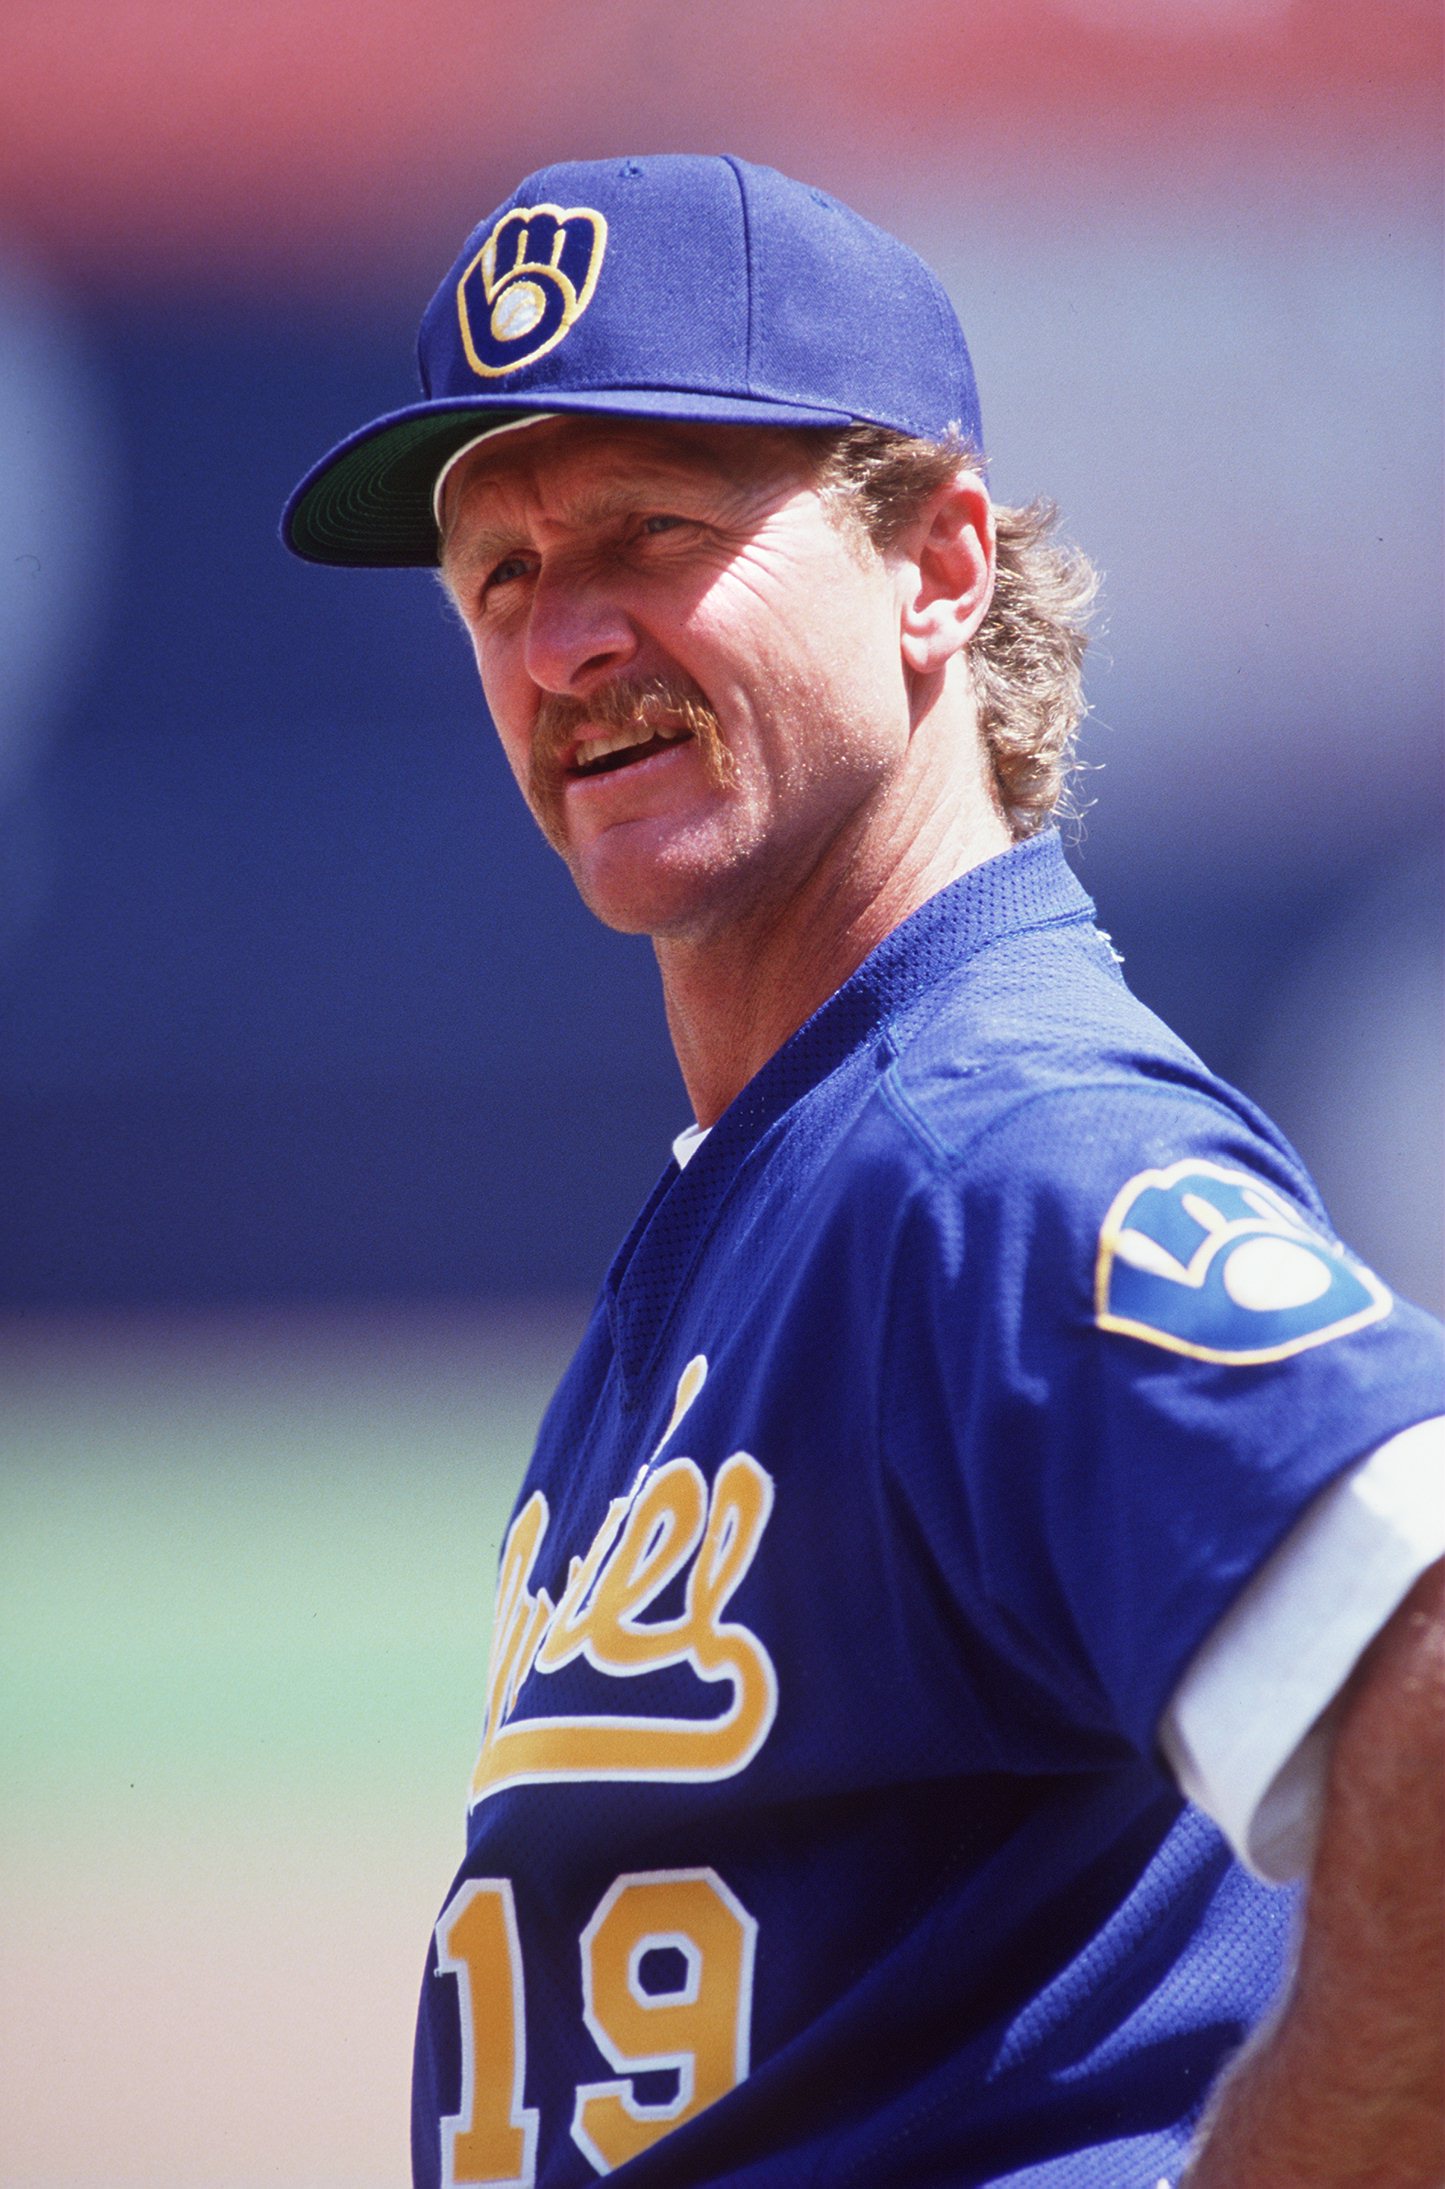 Great Wisconsin sports moments: Robin Yount and Game 5 of World Series